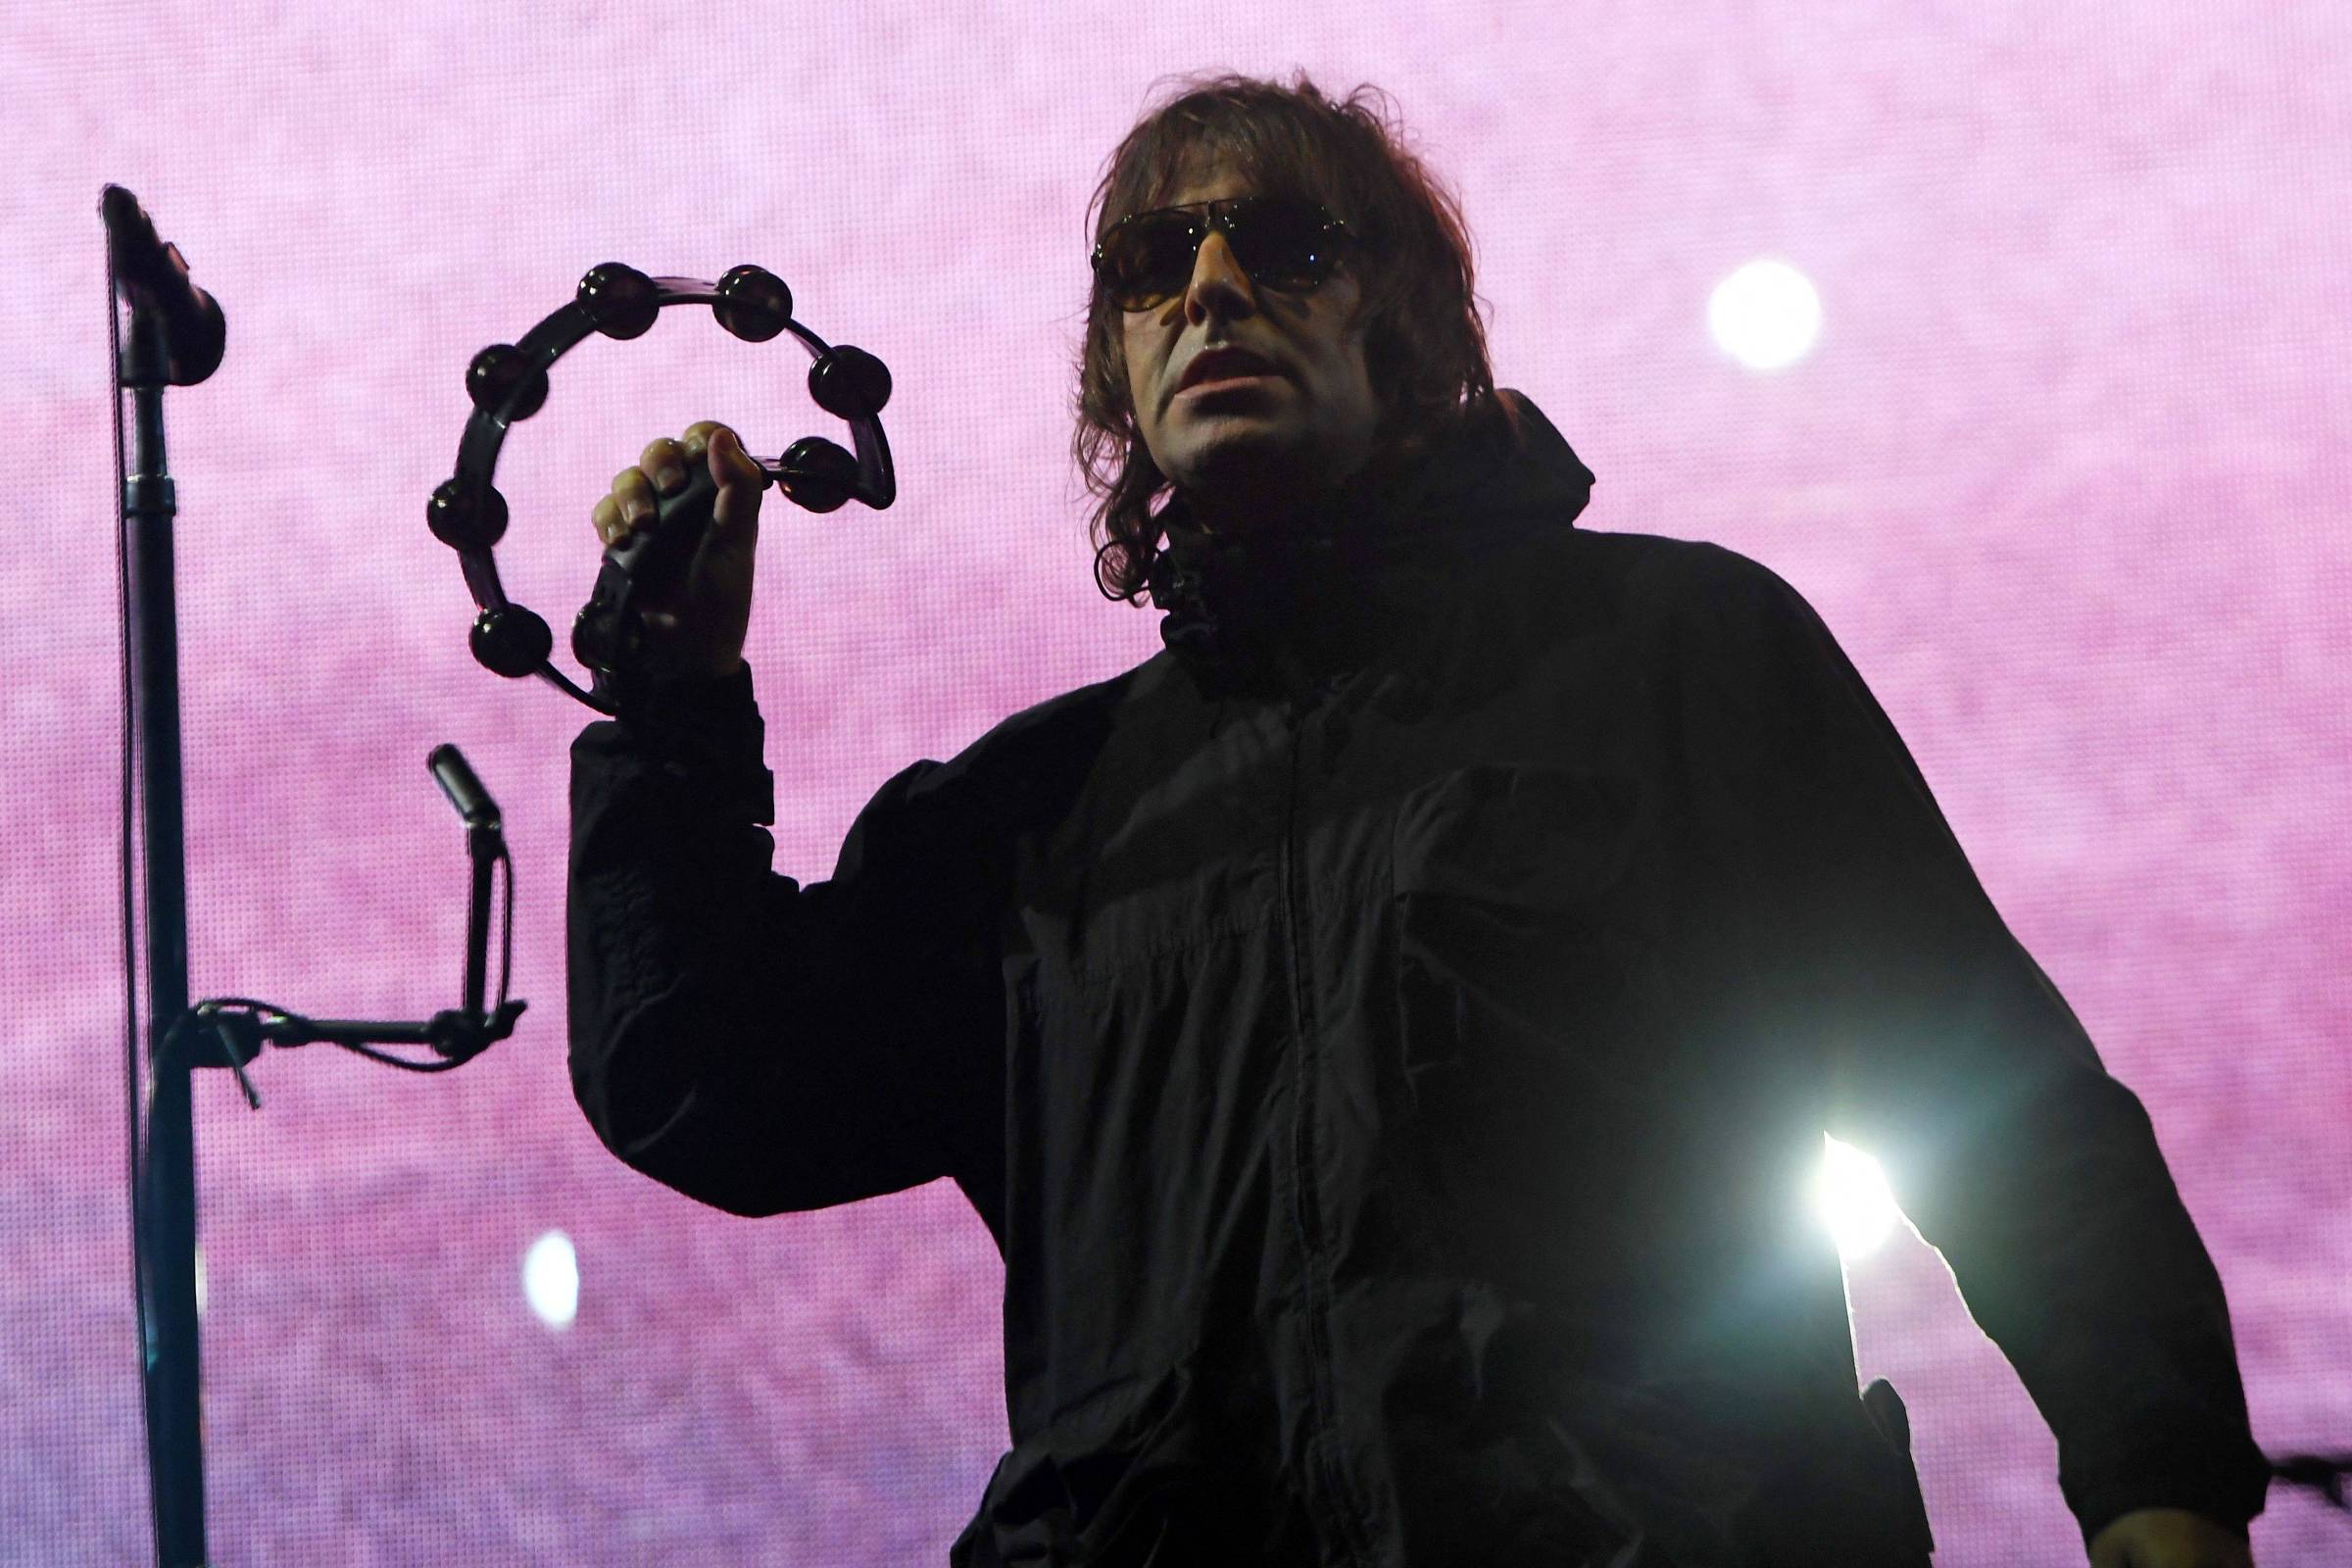 Tambourine used by Liam Gallagher is sold at auction in the UK - News  Bulletin 247